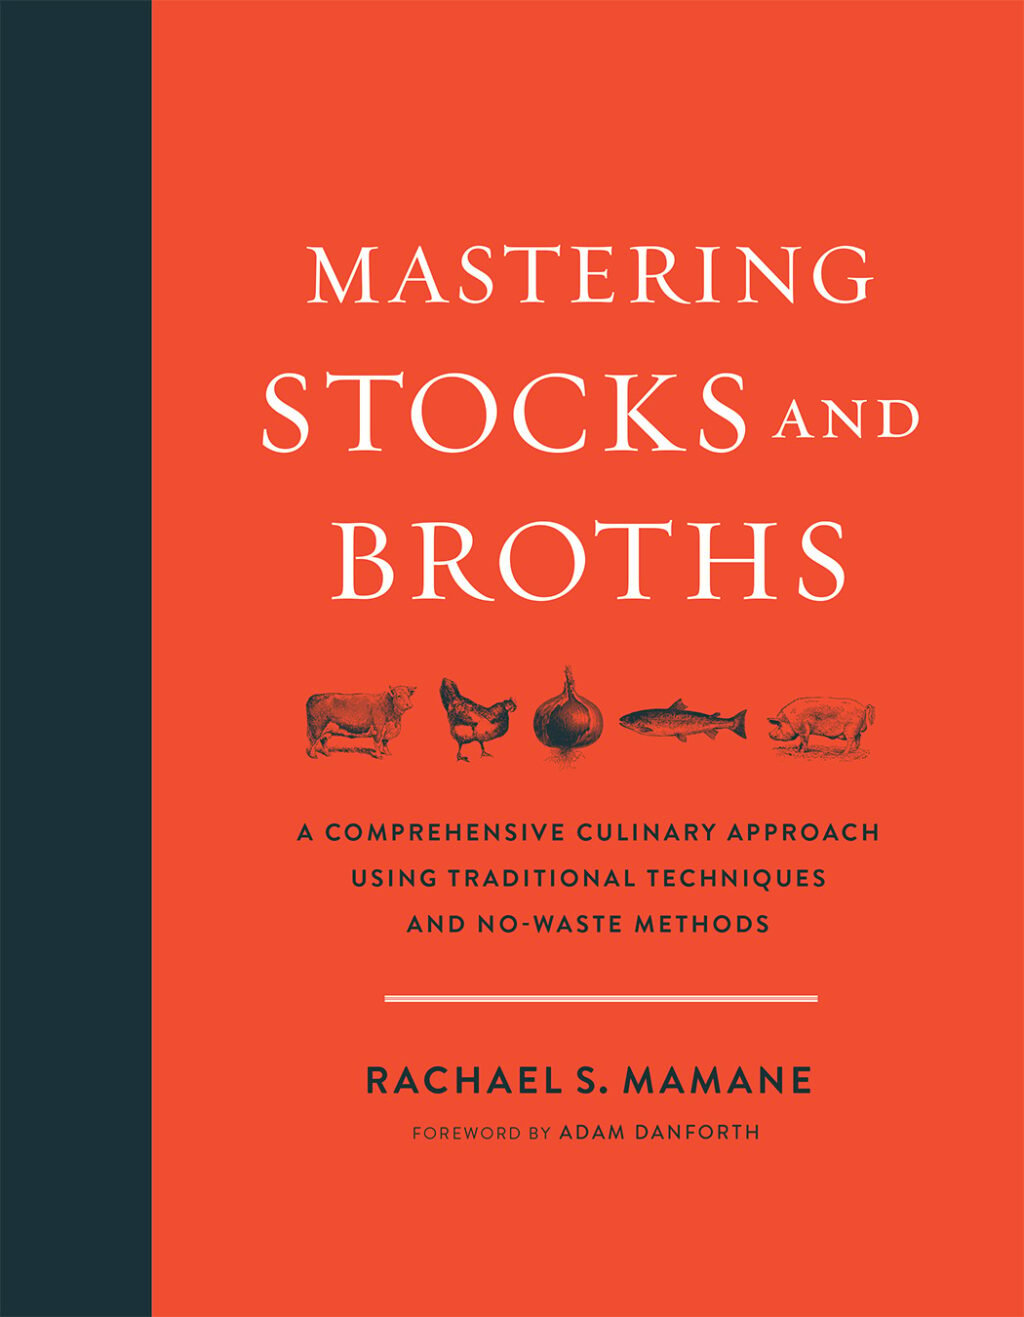 The Mastering Stocks and Broths cover